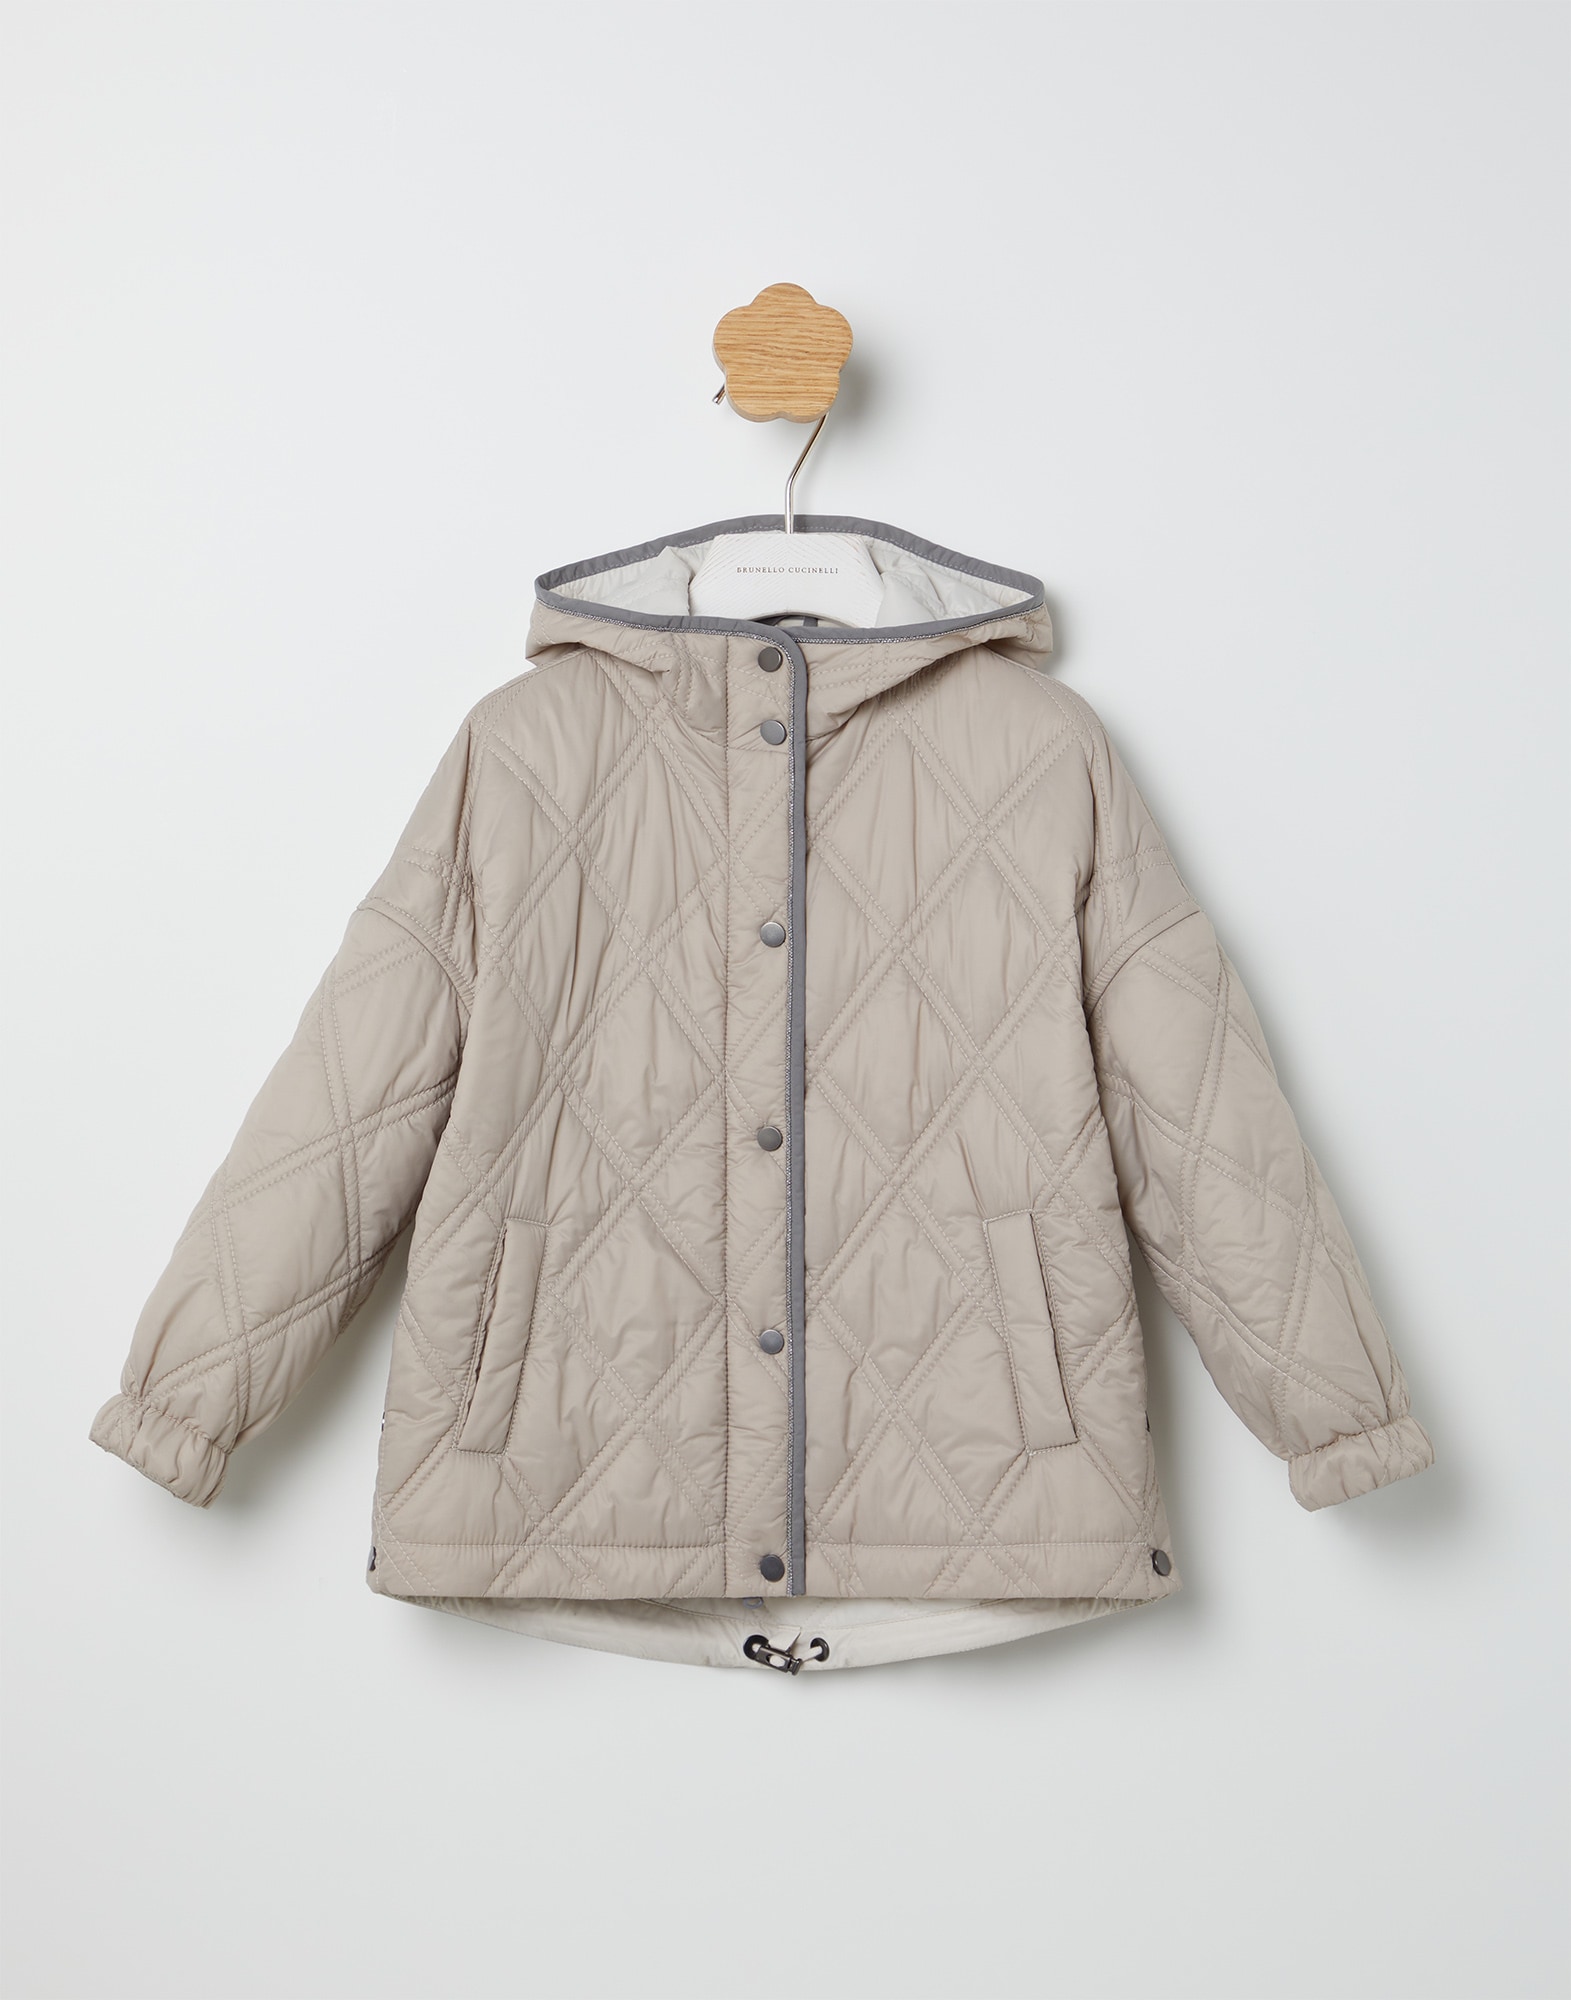 Water-resistant parka